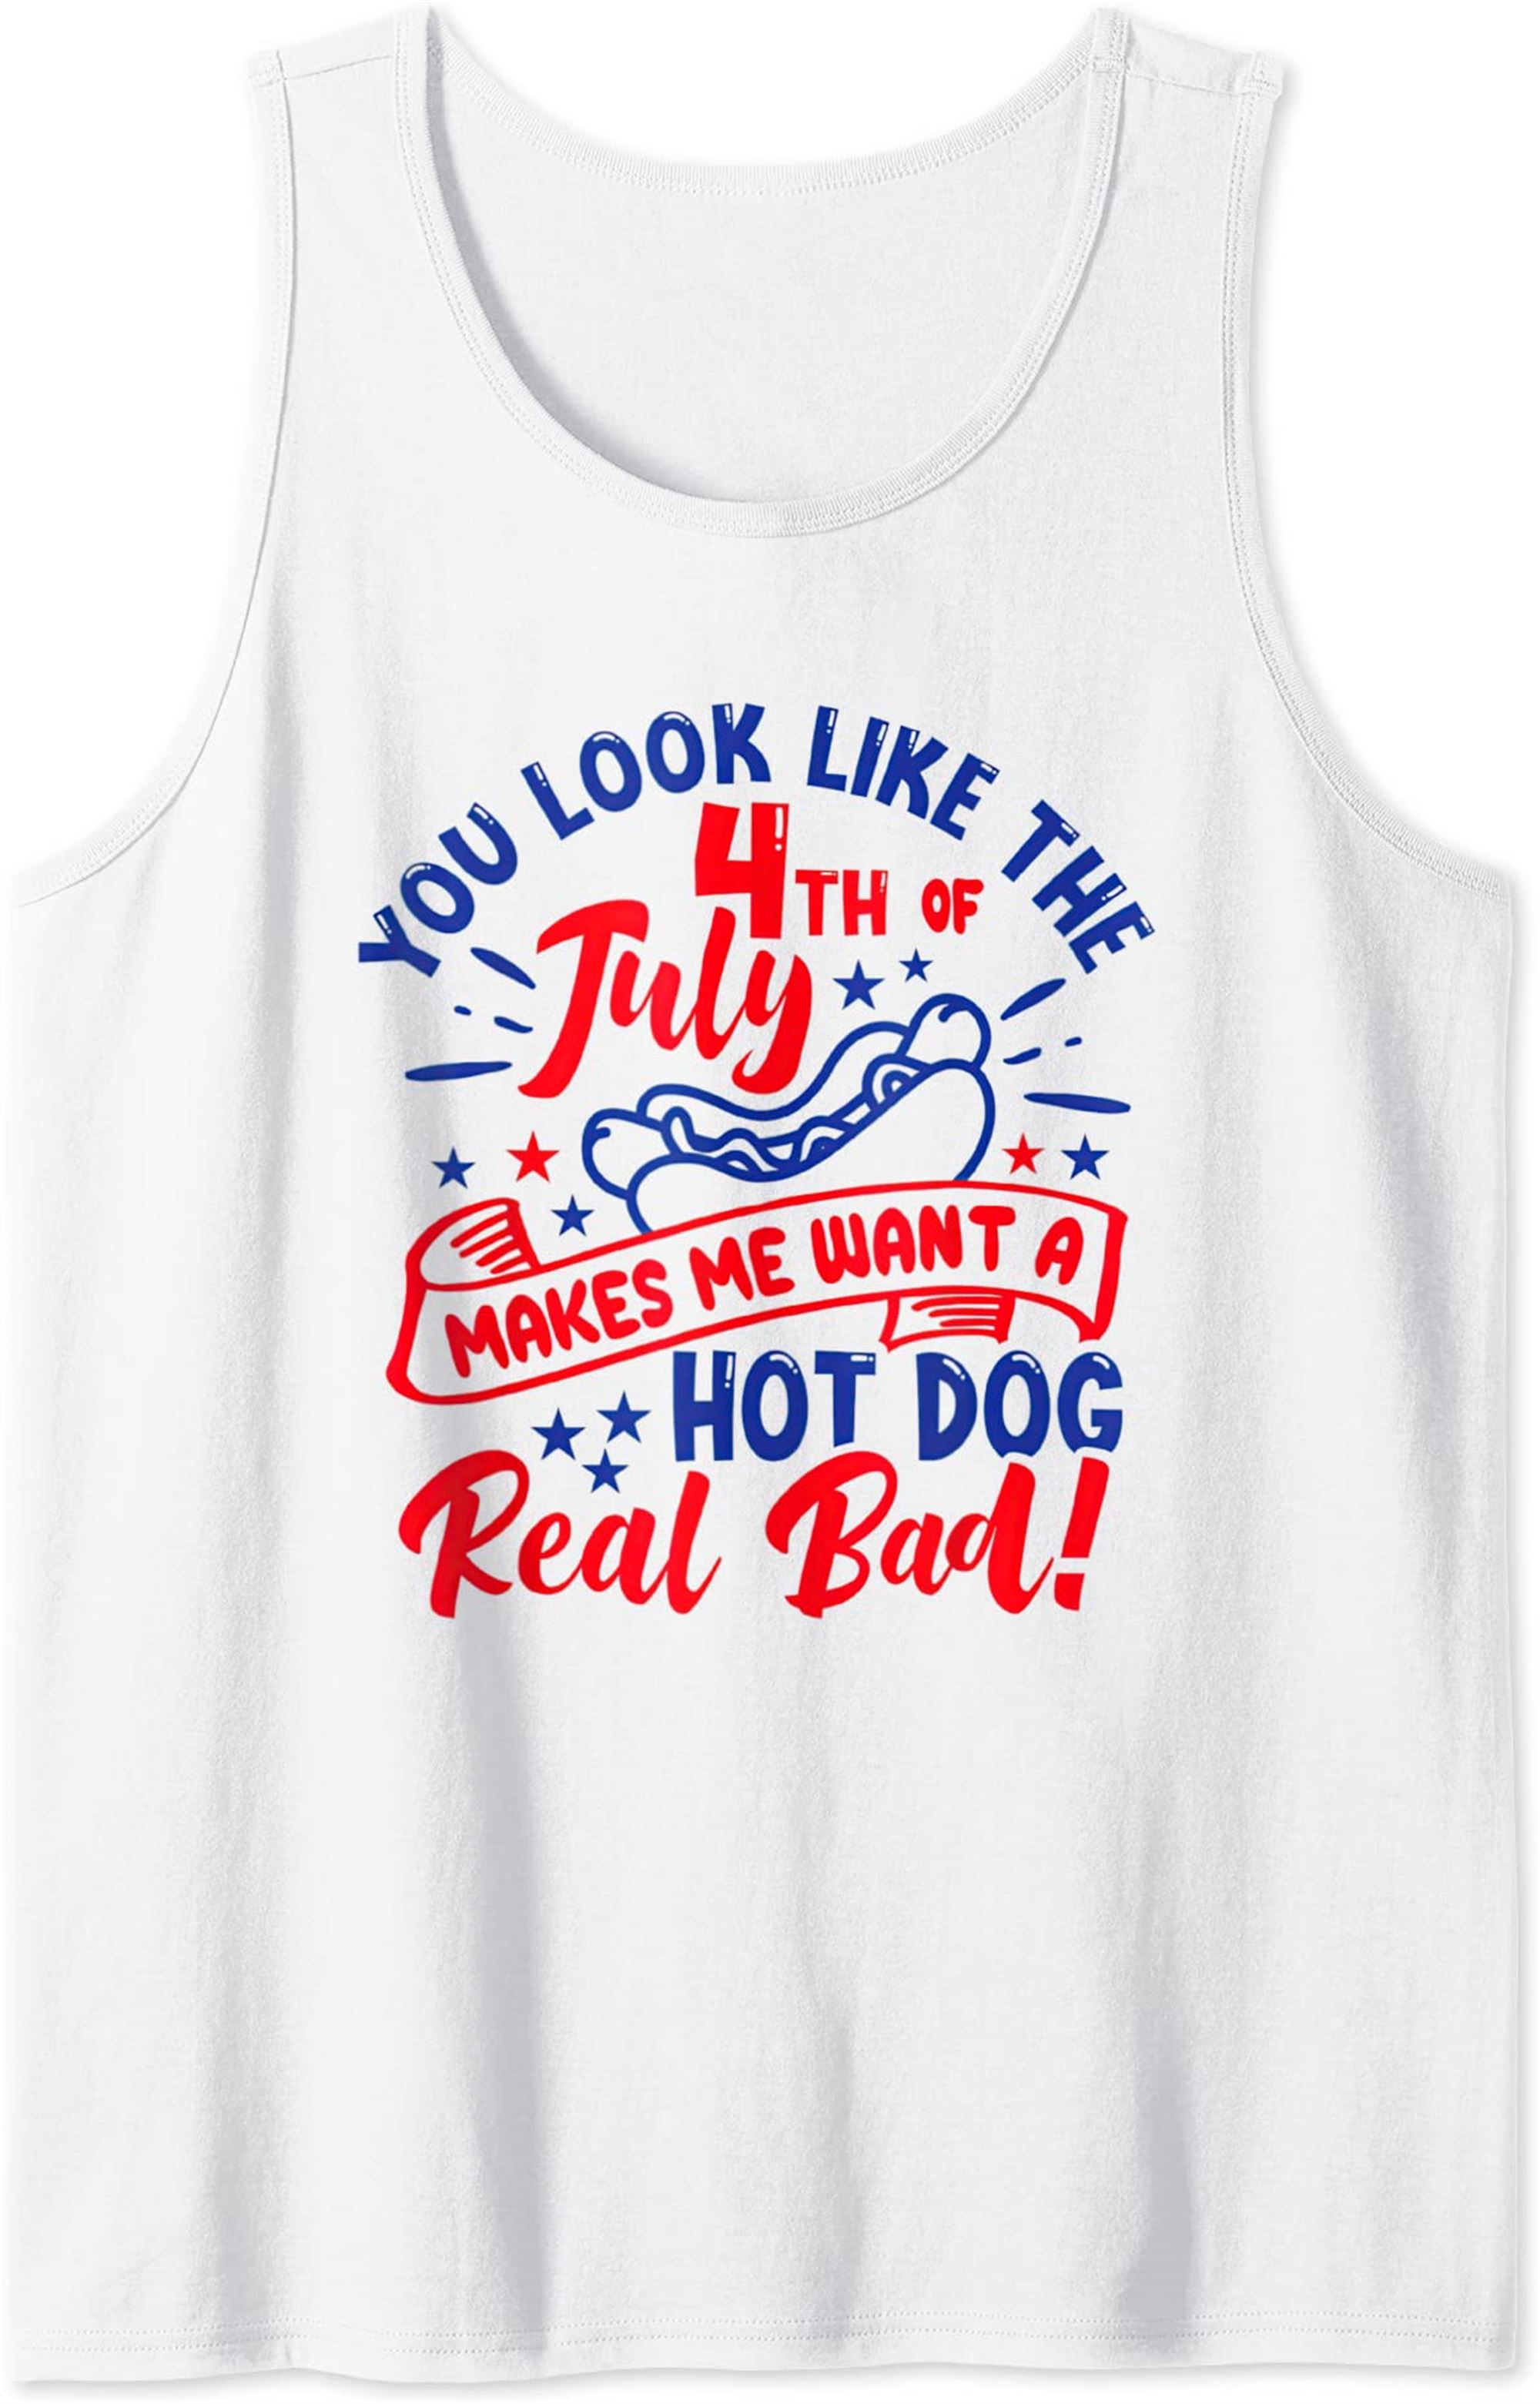 You Look Like The 4th July Make Me Wants A Hot Dog Real Bad Tank Top Full Size Up To 5xl